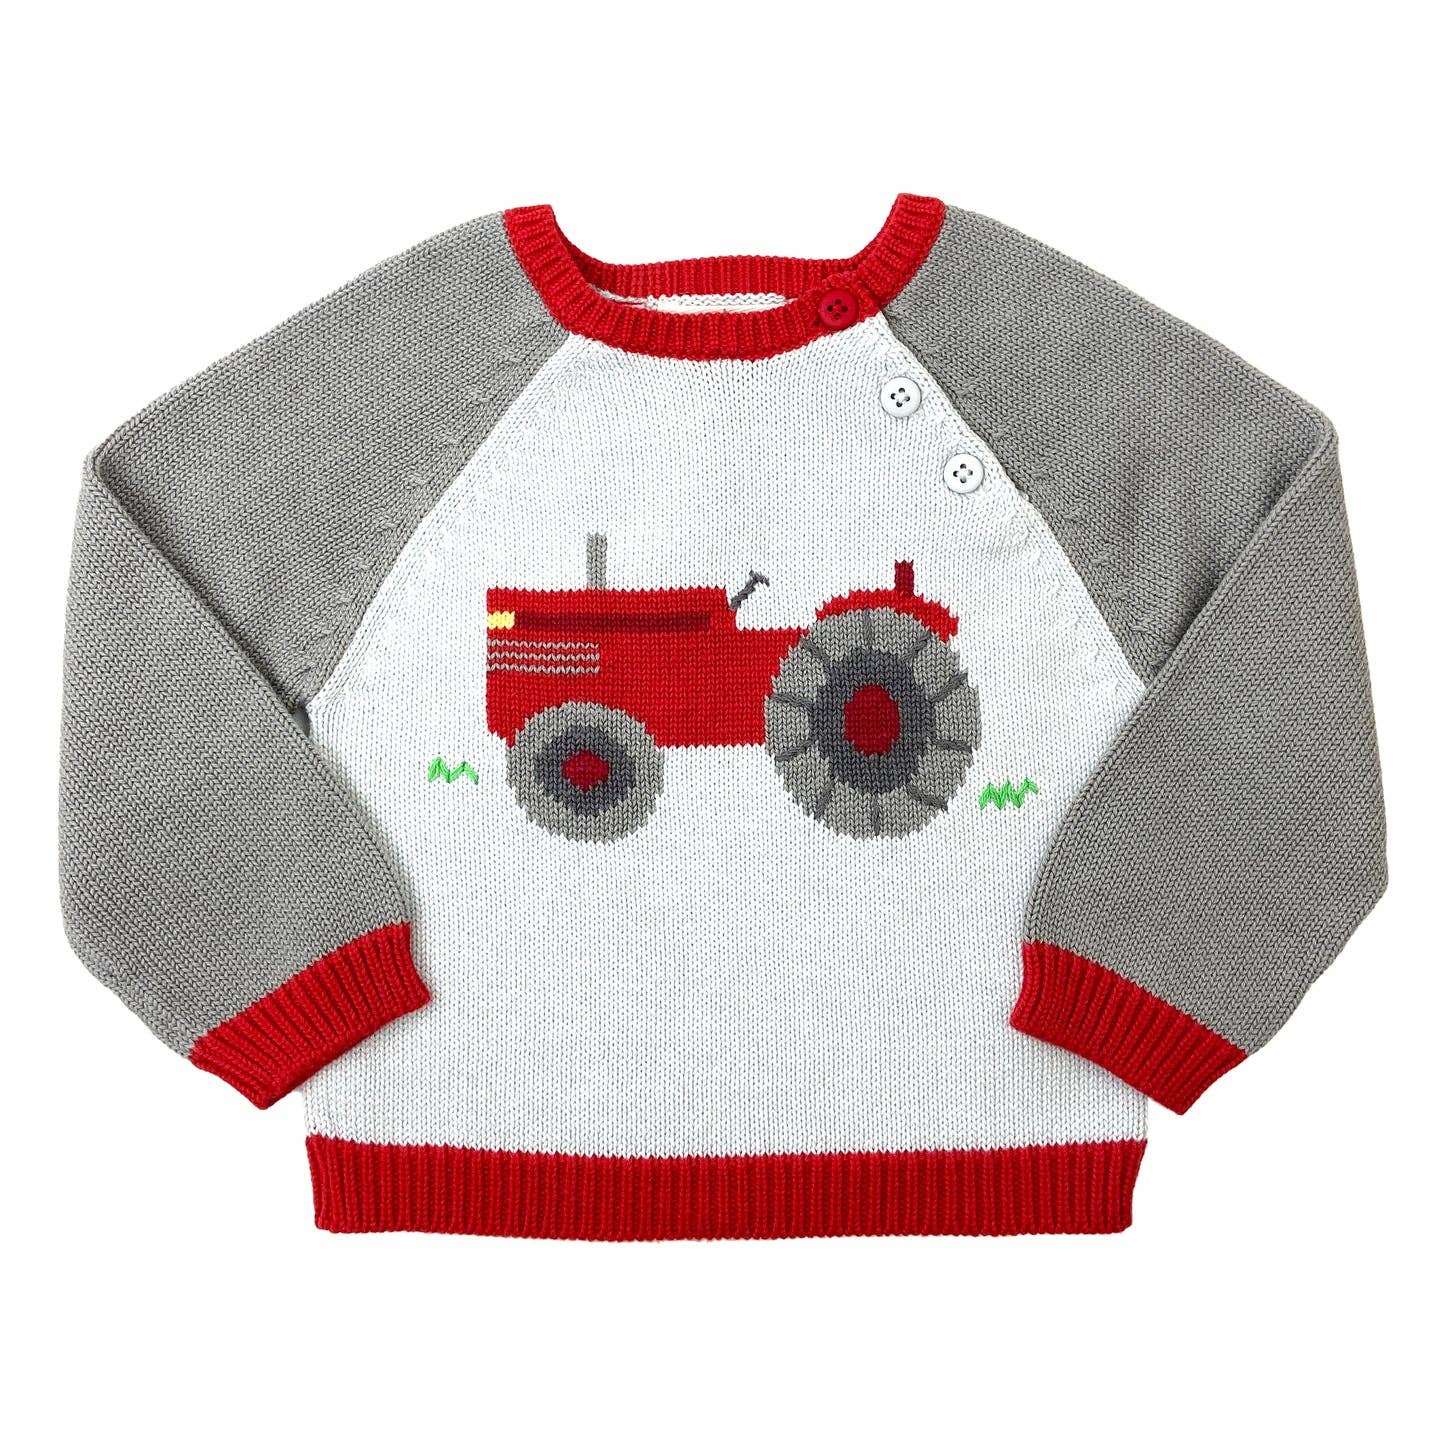 RED TRACTOR KNIT SWEATER